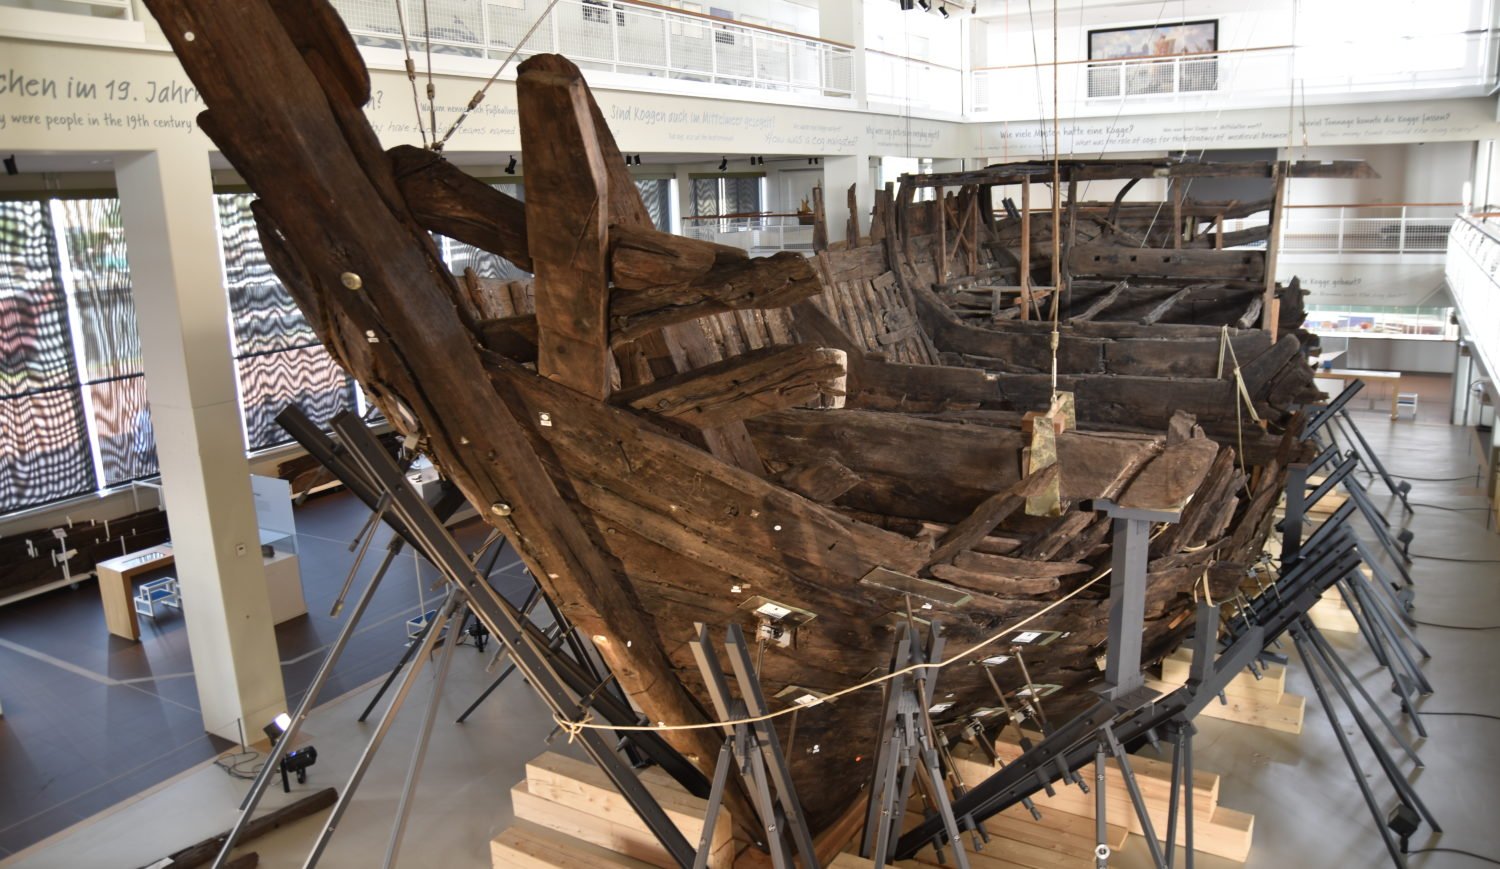 The cog, a 600-year-old wreck, is the centerpiece of the German Maritime Museum